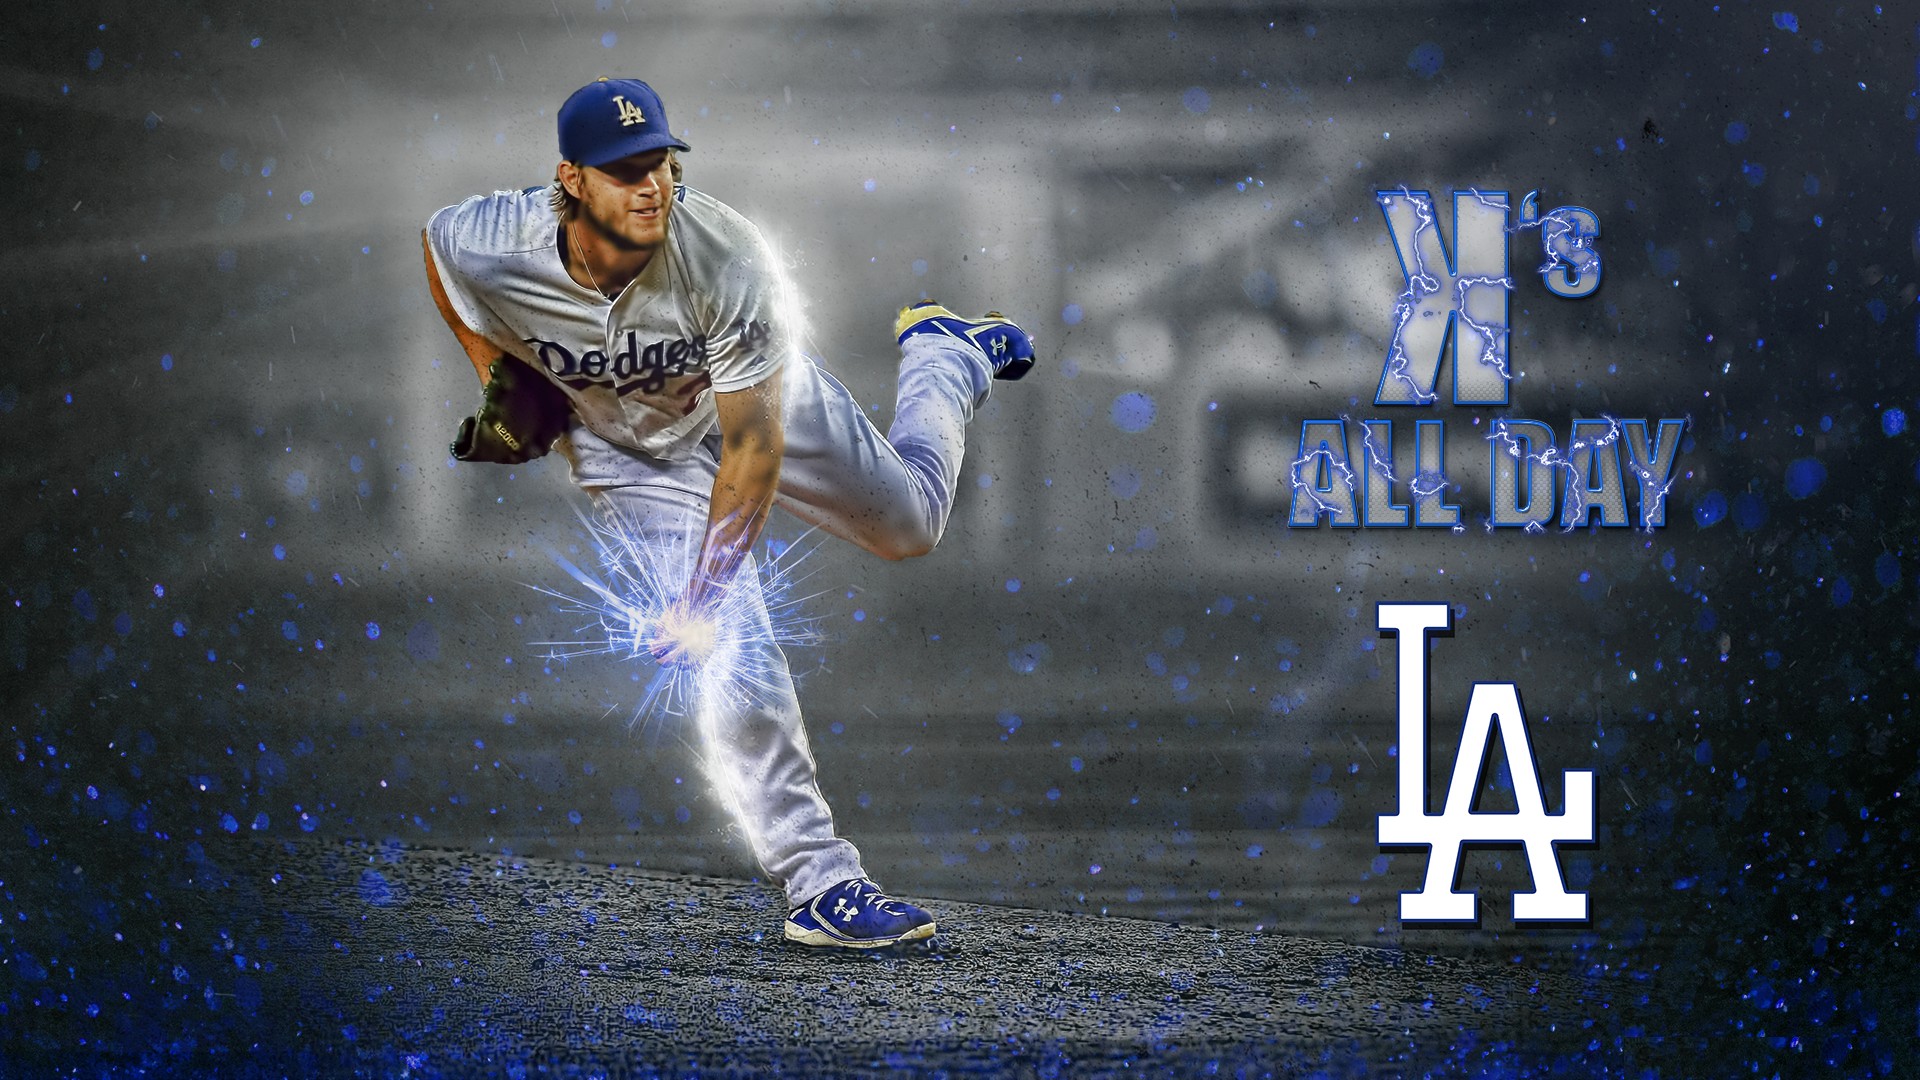 Wallpapers HD Los Angeles Dodgers MLB with high-resolution 1920x1080 pixel. You can use this wallpaper for Mac Desktop Wallpaper, Laptop Screensavers, Android Wallpapers, Tablet or iPhone Home Screen and another mobile phone device